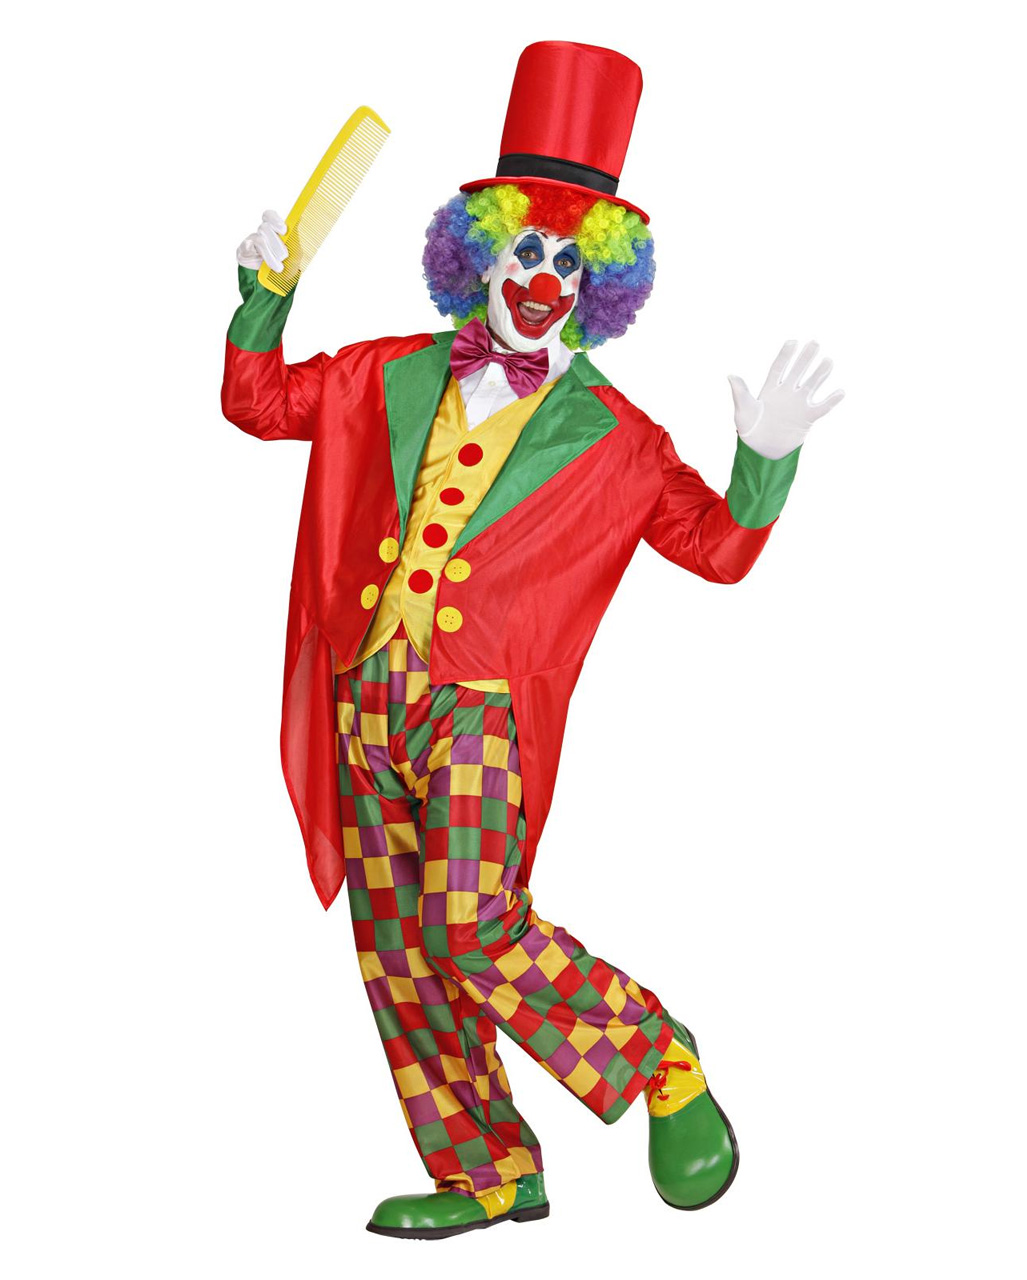 [Download 45+] Get Costume Clowns Gif cdr The Clown Wore A Wide Tie And A Floppy Hat